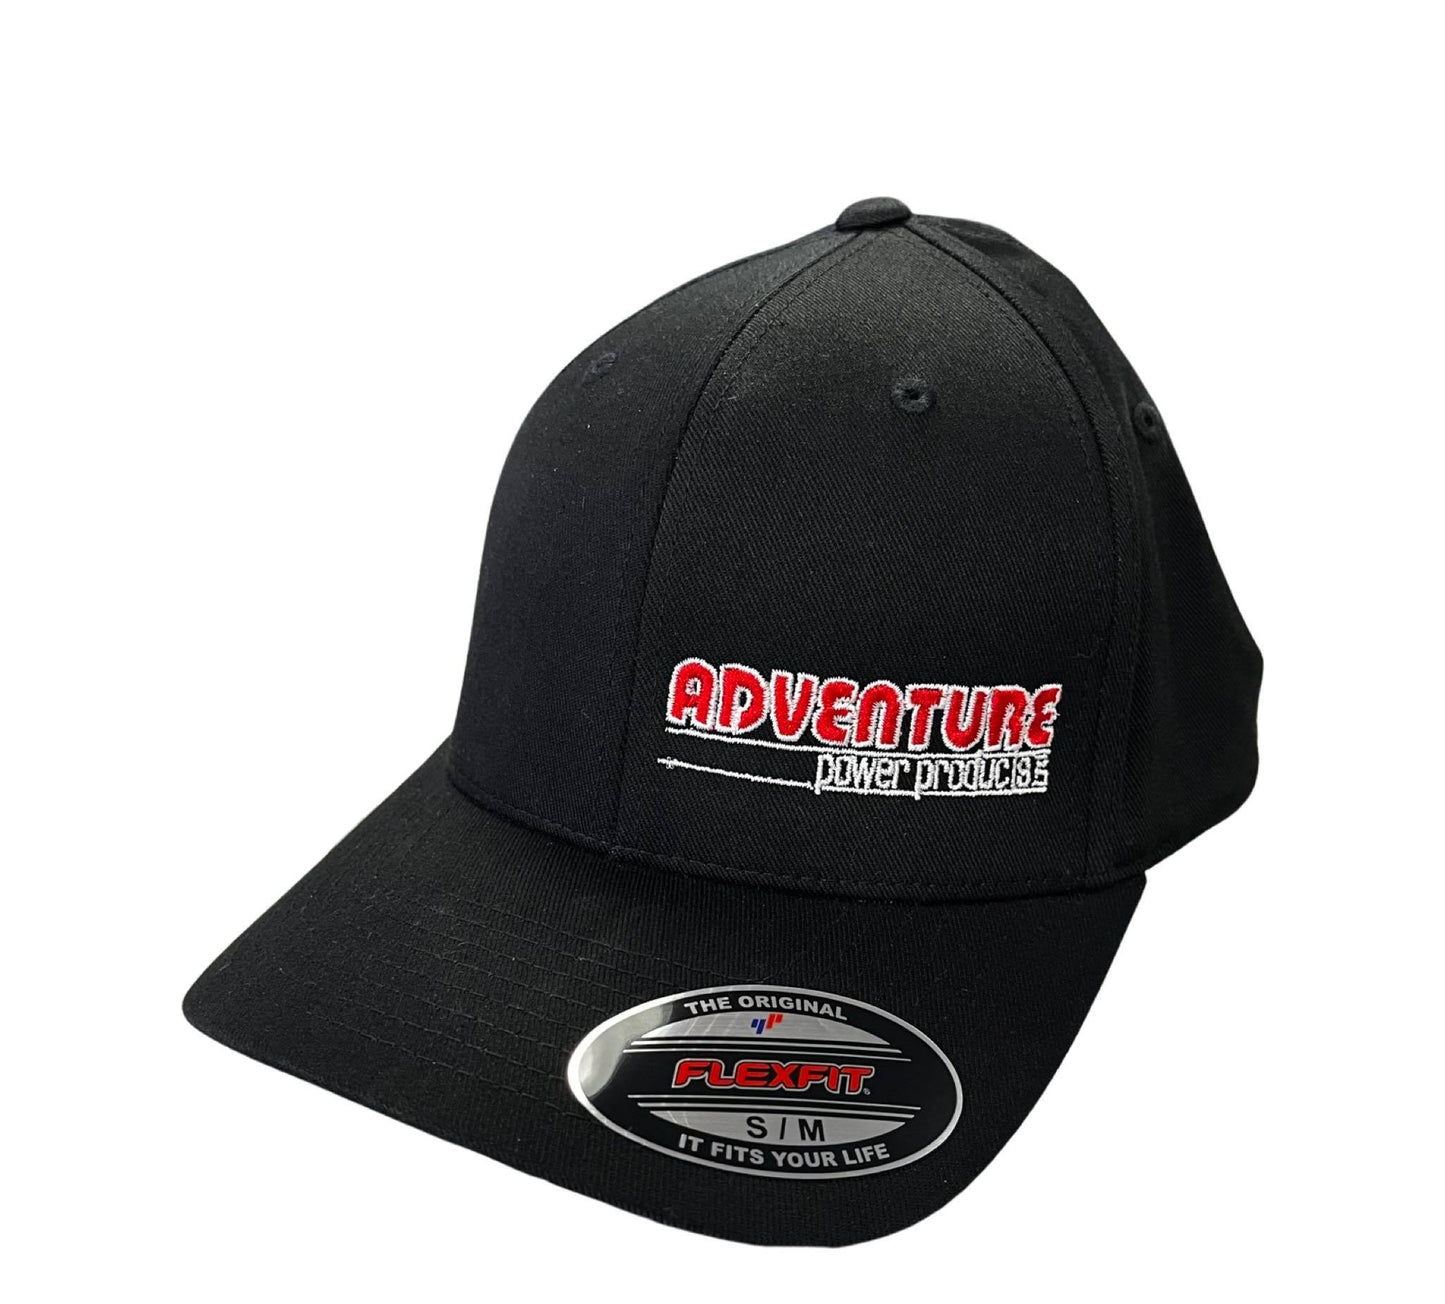 Adventure Power Products Hats